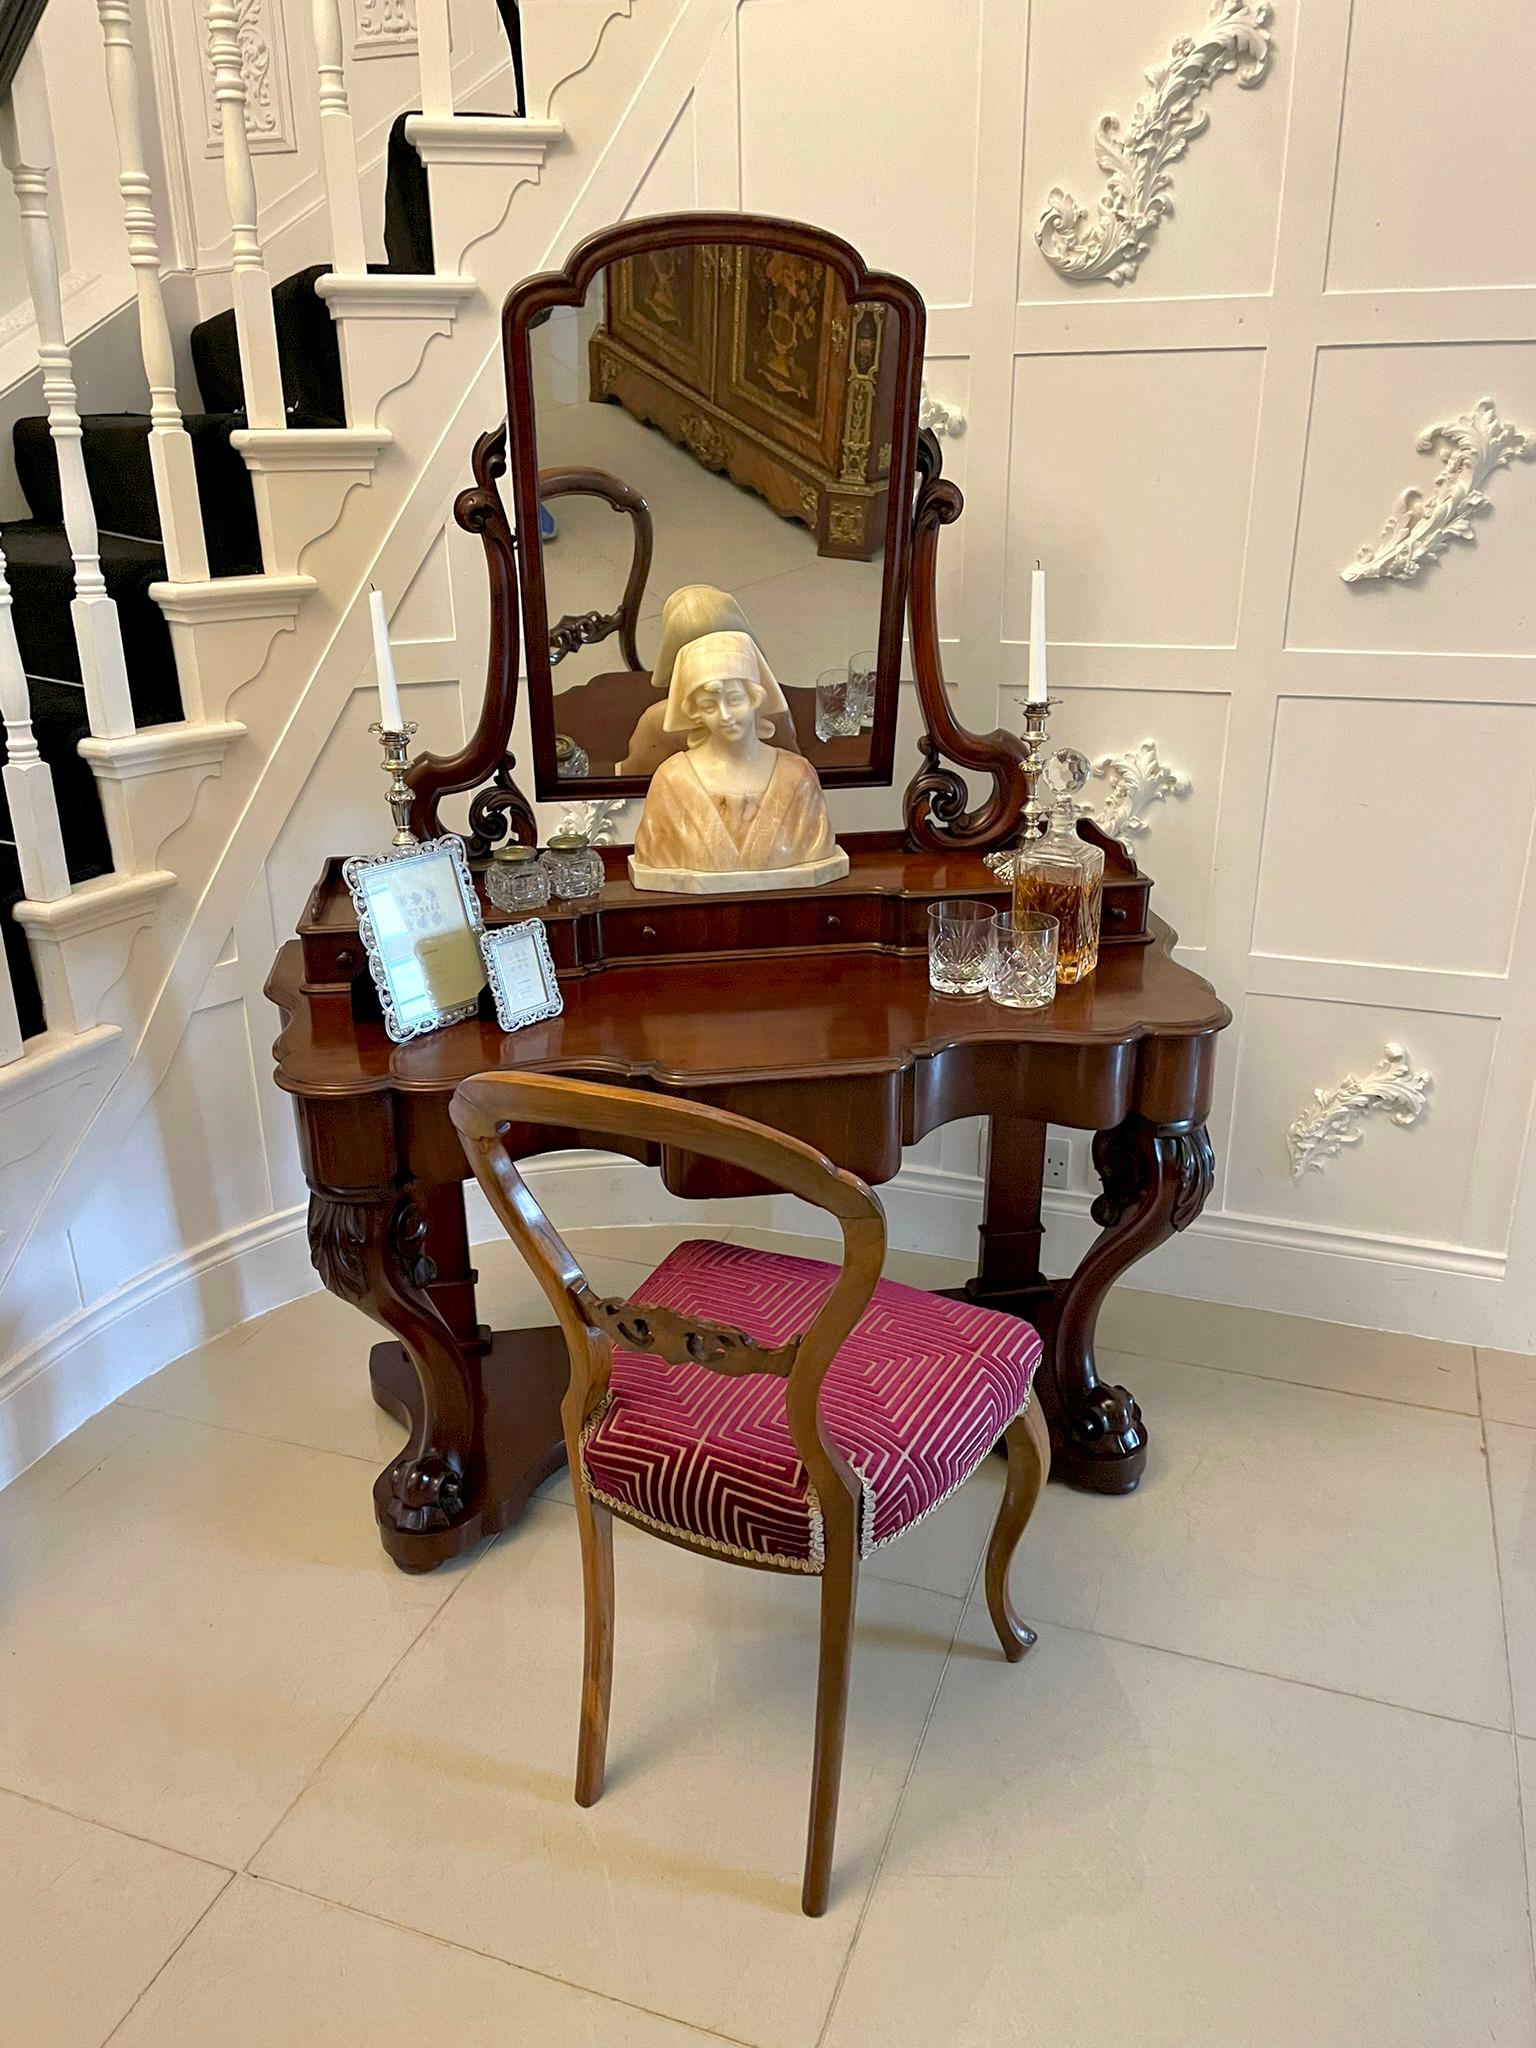 Quality Victorian antique carved mahogany dressing table having an attractive shaped upper section, tilting mirror with elegantly scrolled carved supports. It has three small attractive shaped drawers with original turned knobs. The lower section